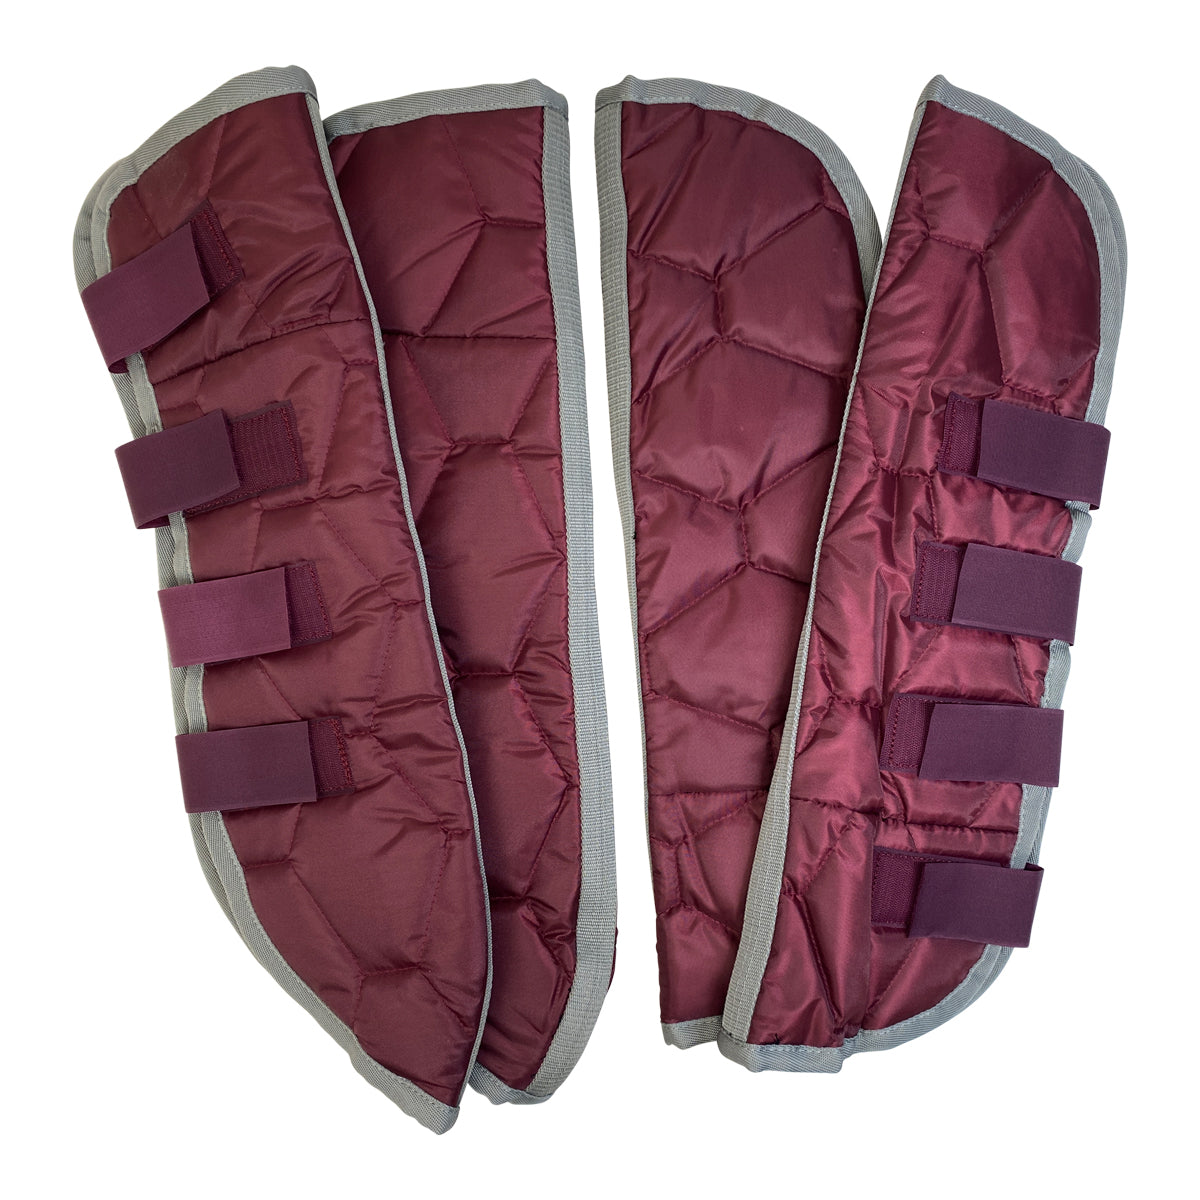 Jacks MFG Quilted Shipping Boots  in Burgundy w/Grey